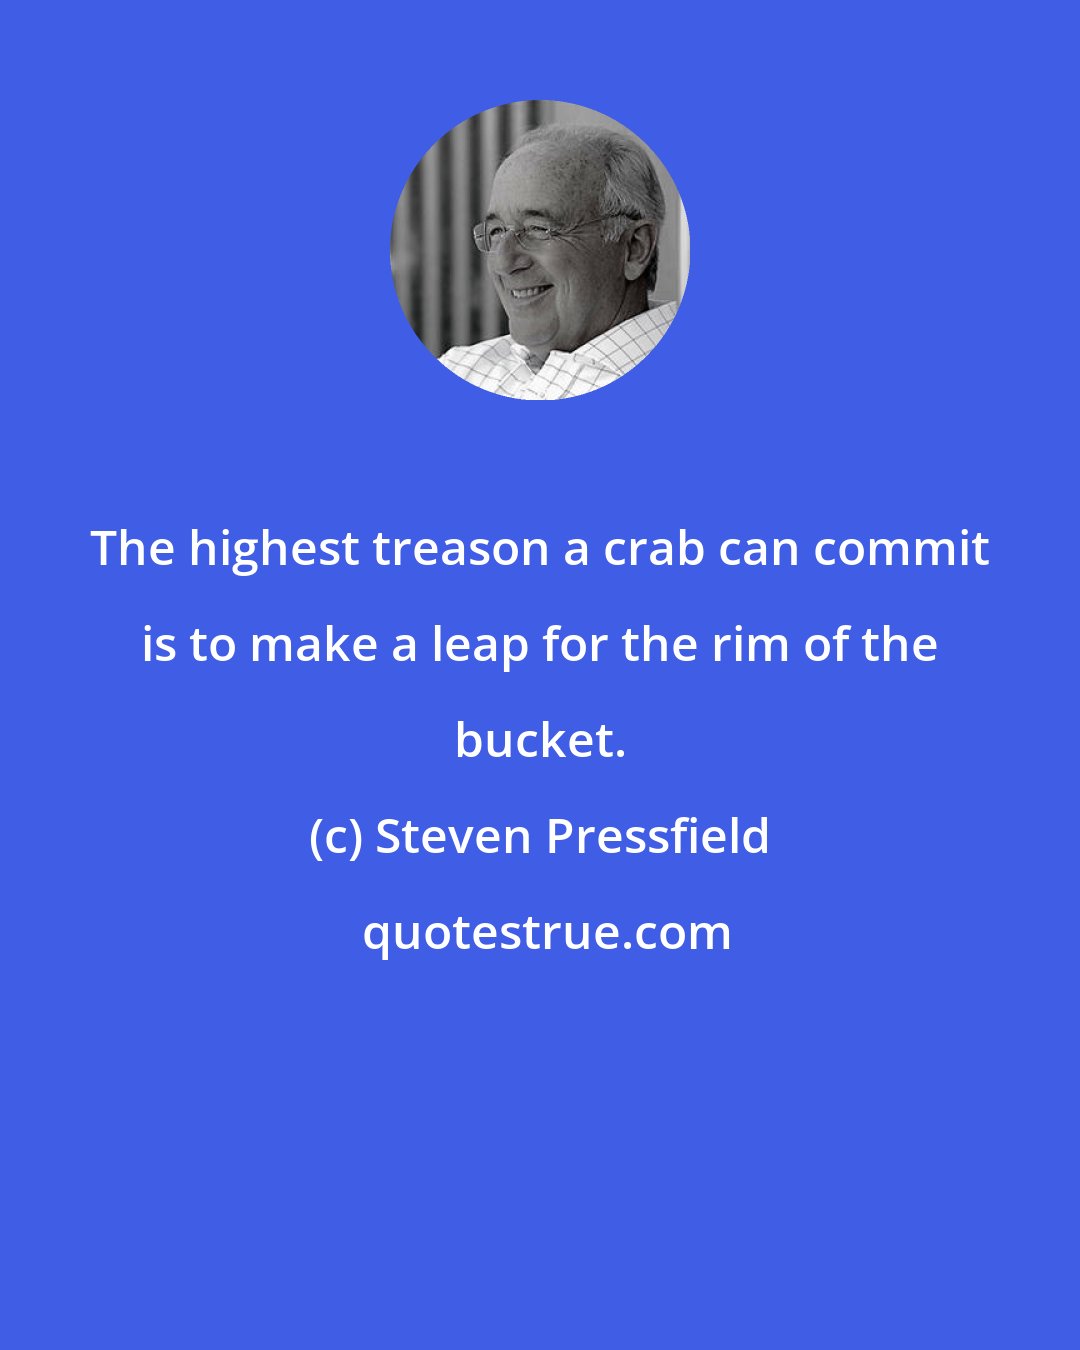 Steven Pressfield: The highest treason a crab can commit is to make a leap for the rim of the bucket.